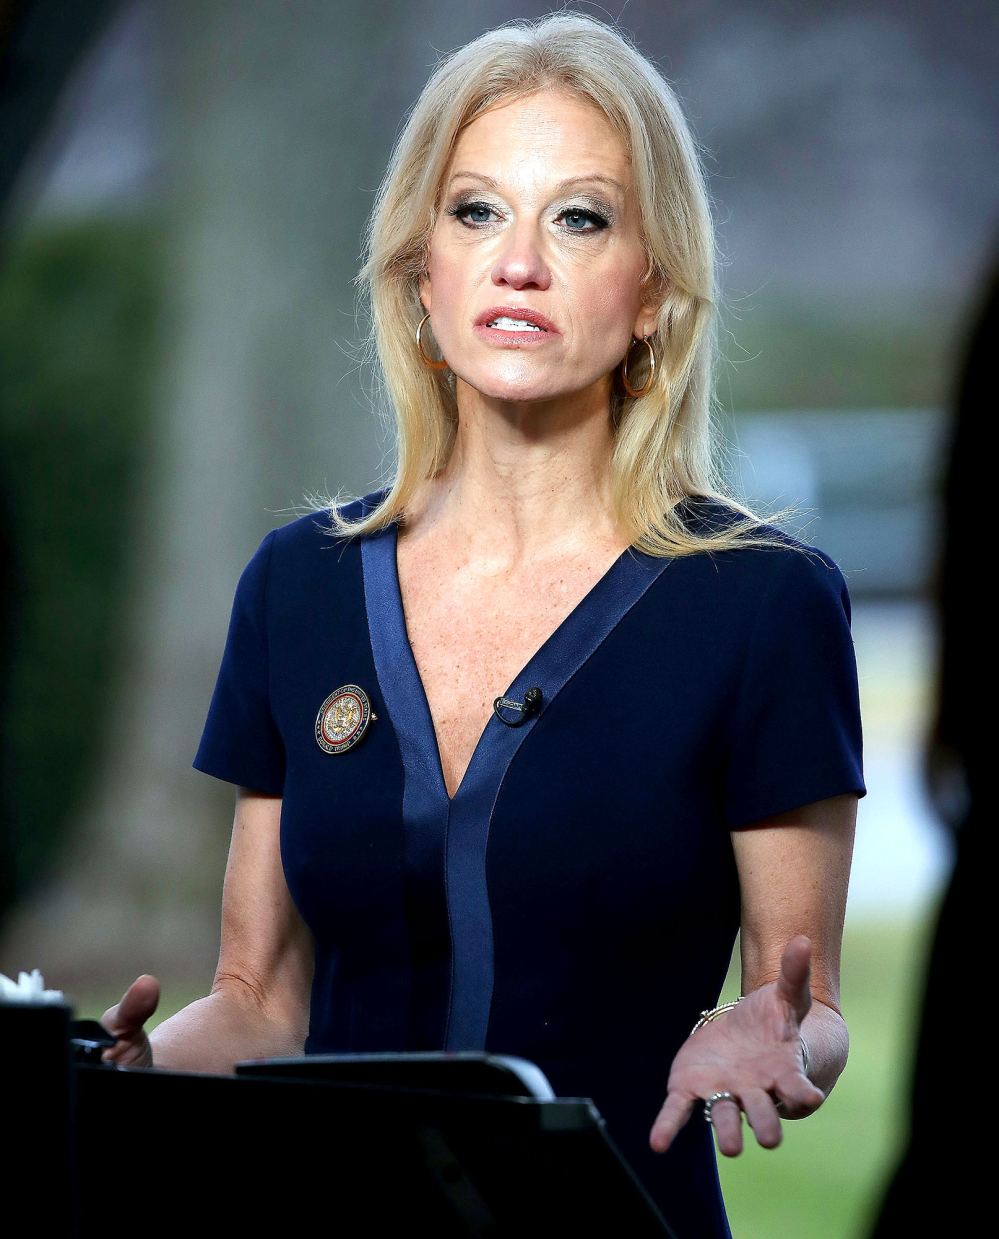 Counselor to President, Kellyanne Conway, appears on the Sunday morning show This Week with George Stephanopoulos, from the north lawn at the White House, January 22, 2017 in Washington, DC.